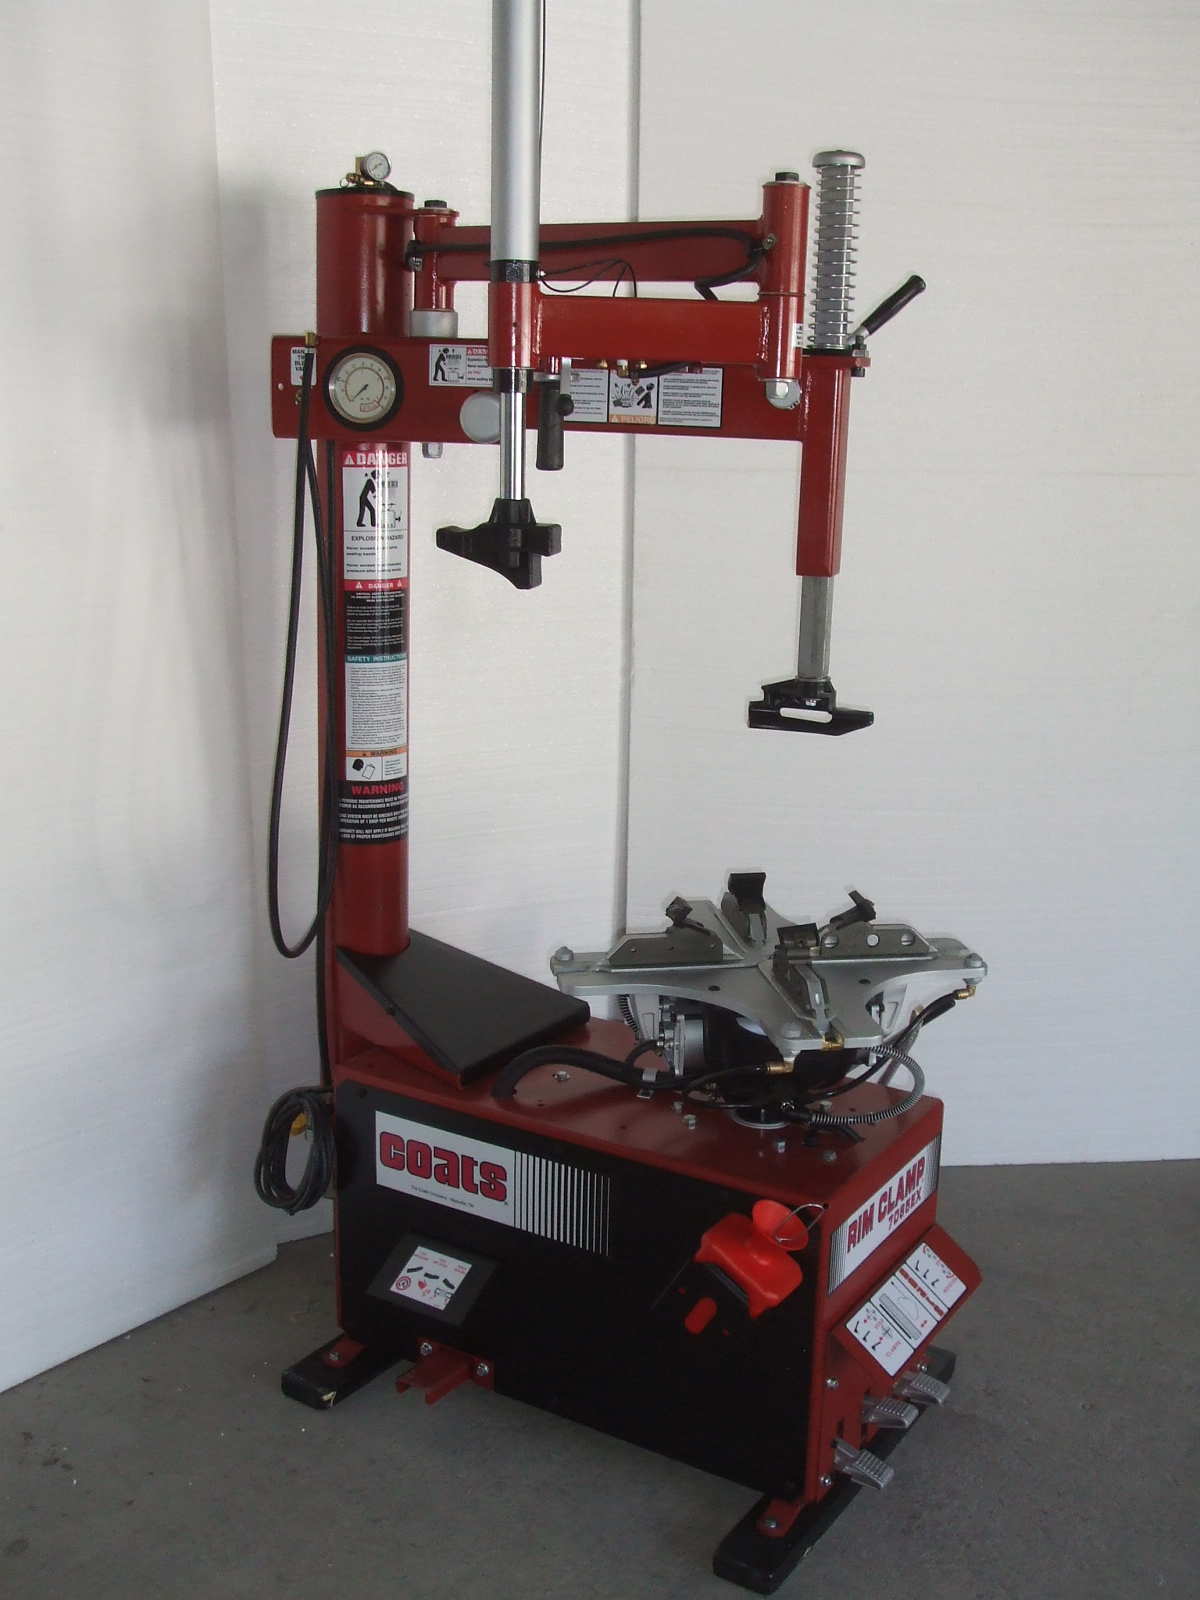 Remanufacturing Services - Tire Changers :: Remanufacturing Service